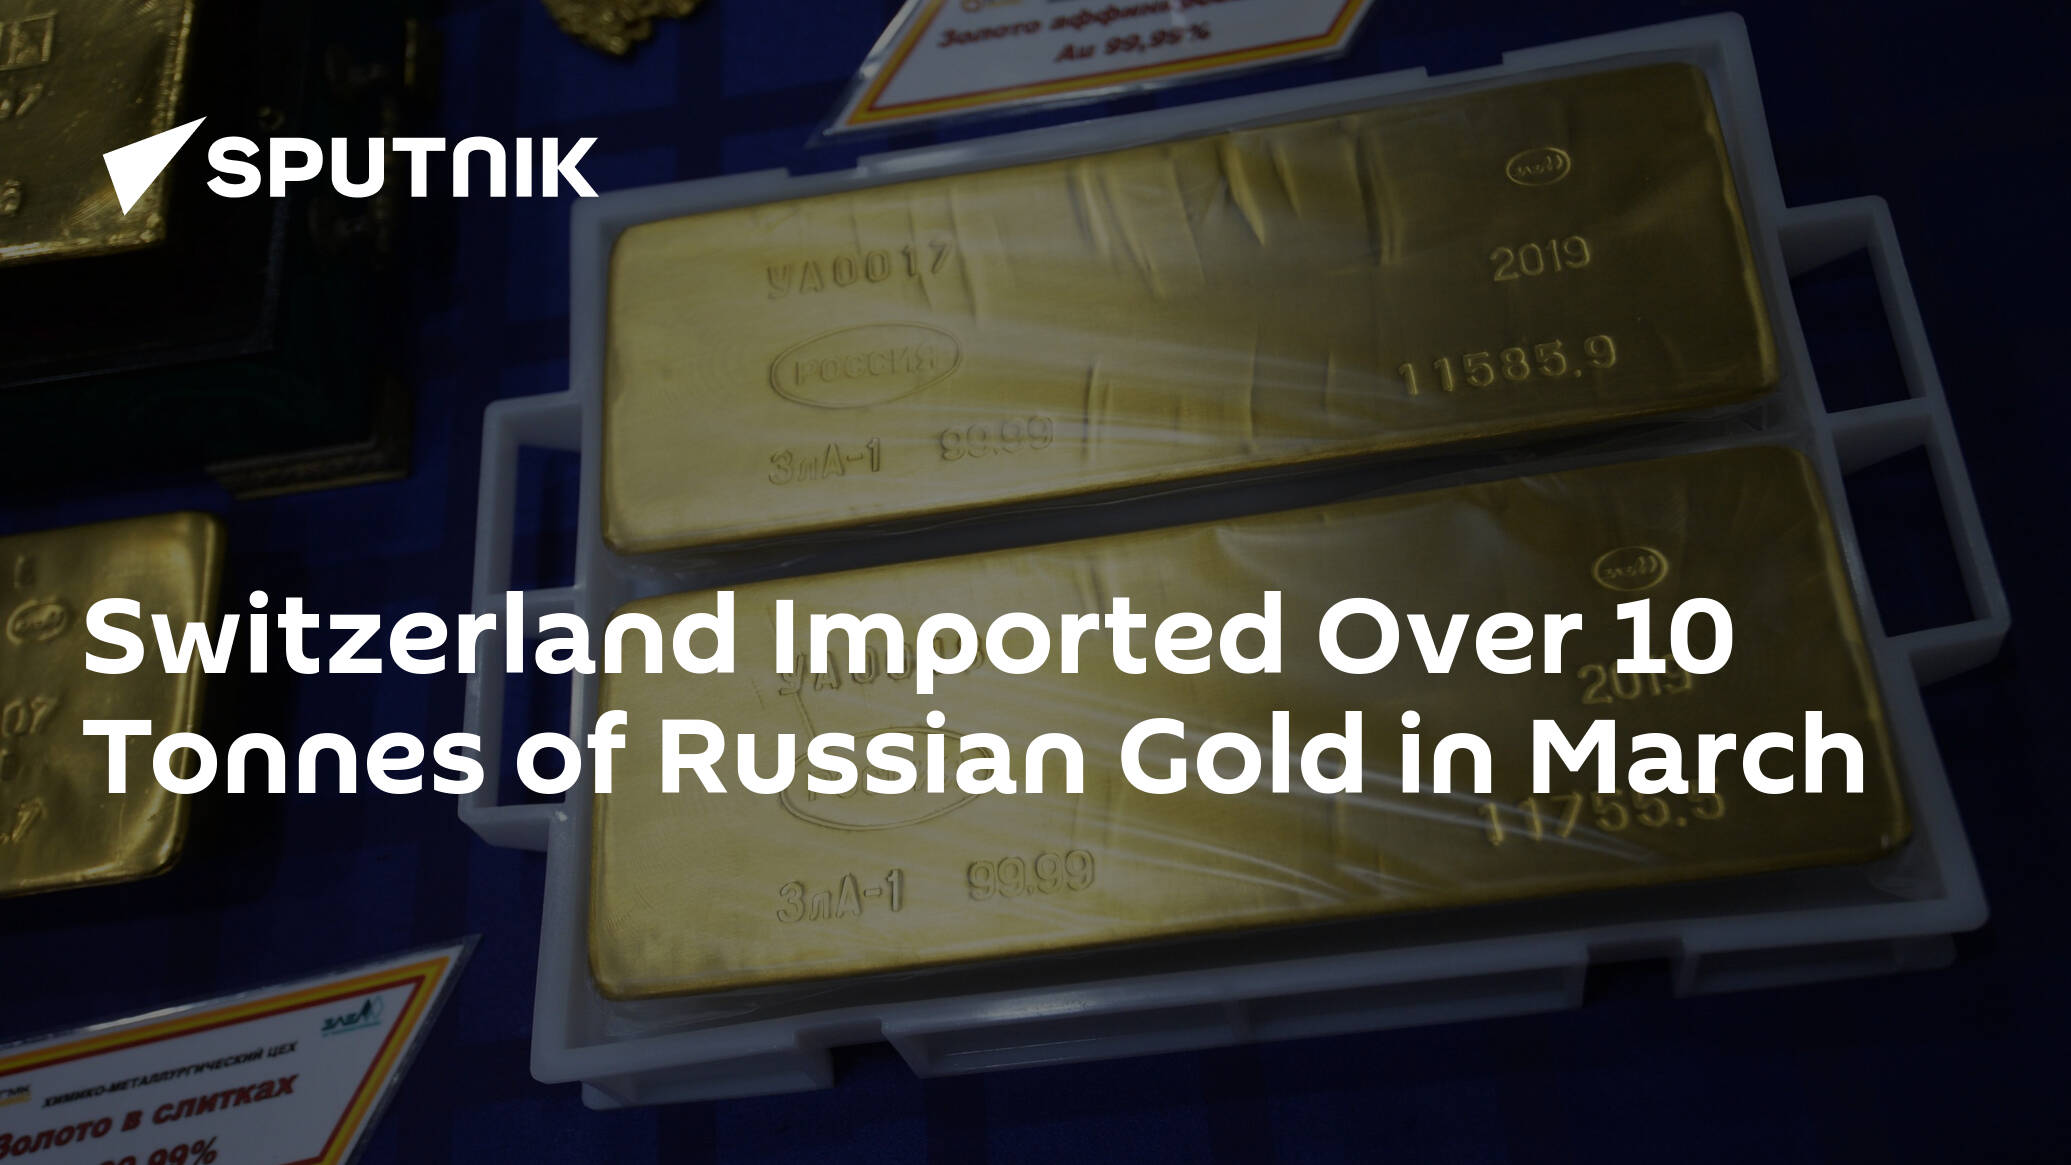 Switzerland Imported Over 10 Tonnes of Russian Gold in March